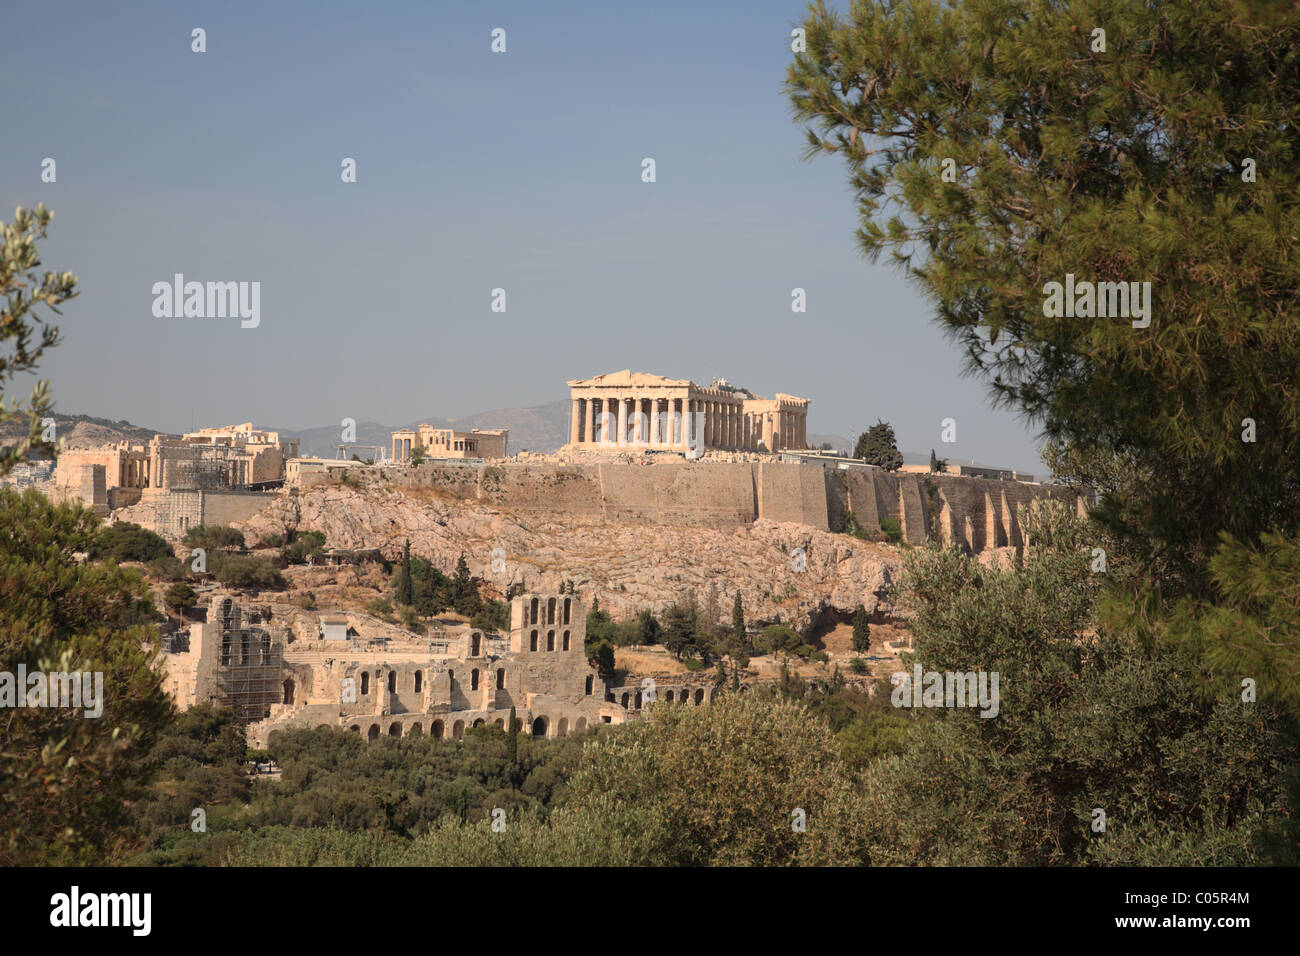 View of the Acropolis, Herodes Atticus Theatre and Parthenon from Filopappos Hill, Athens, Greece, Stock Photo